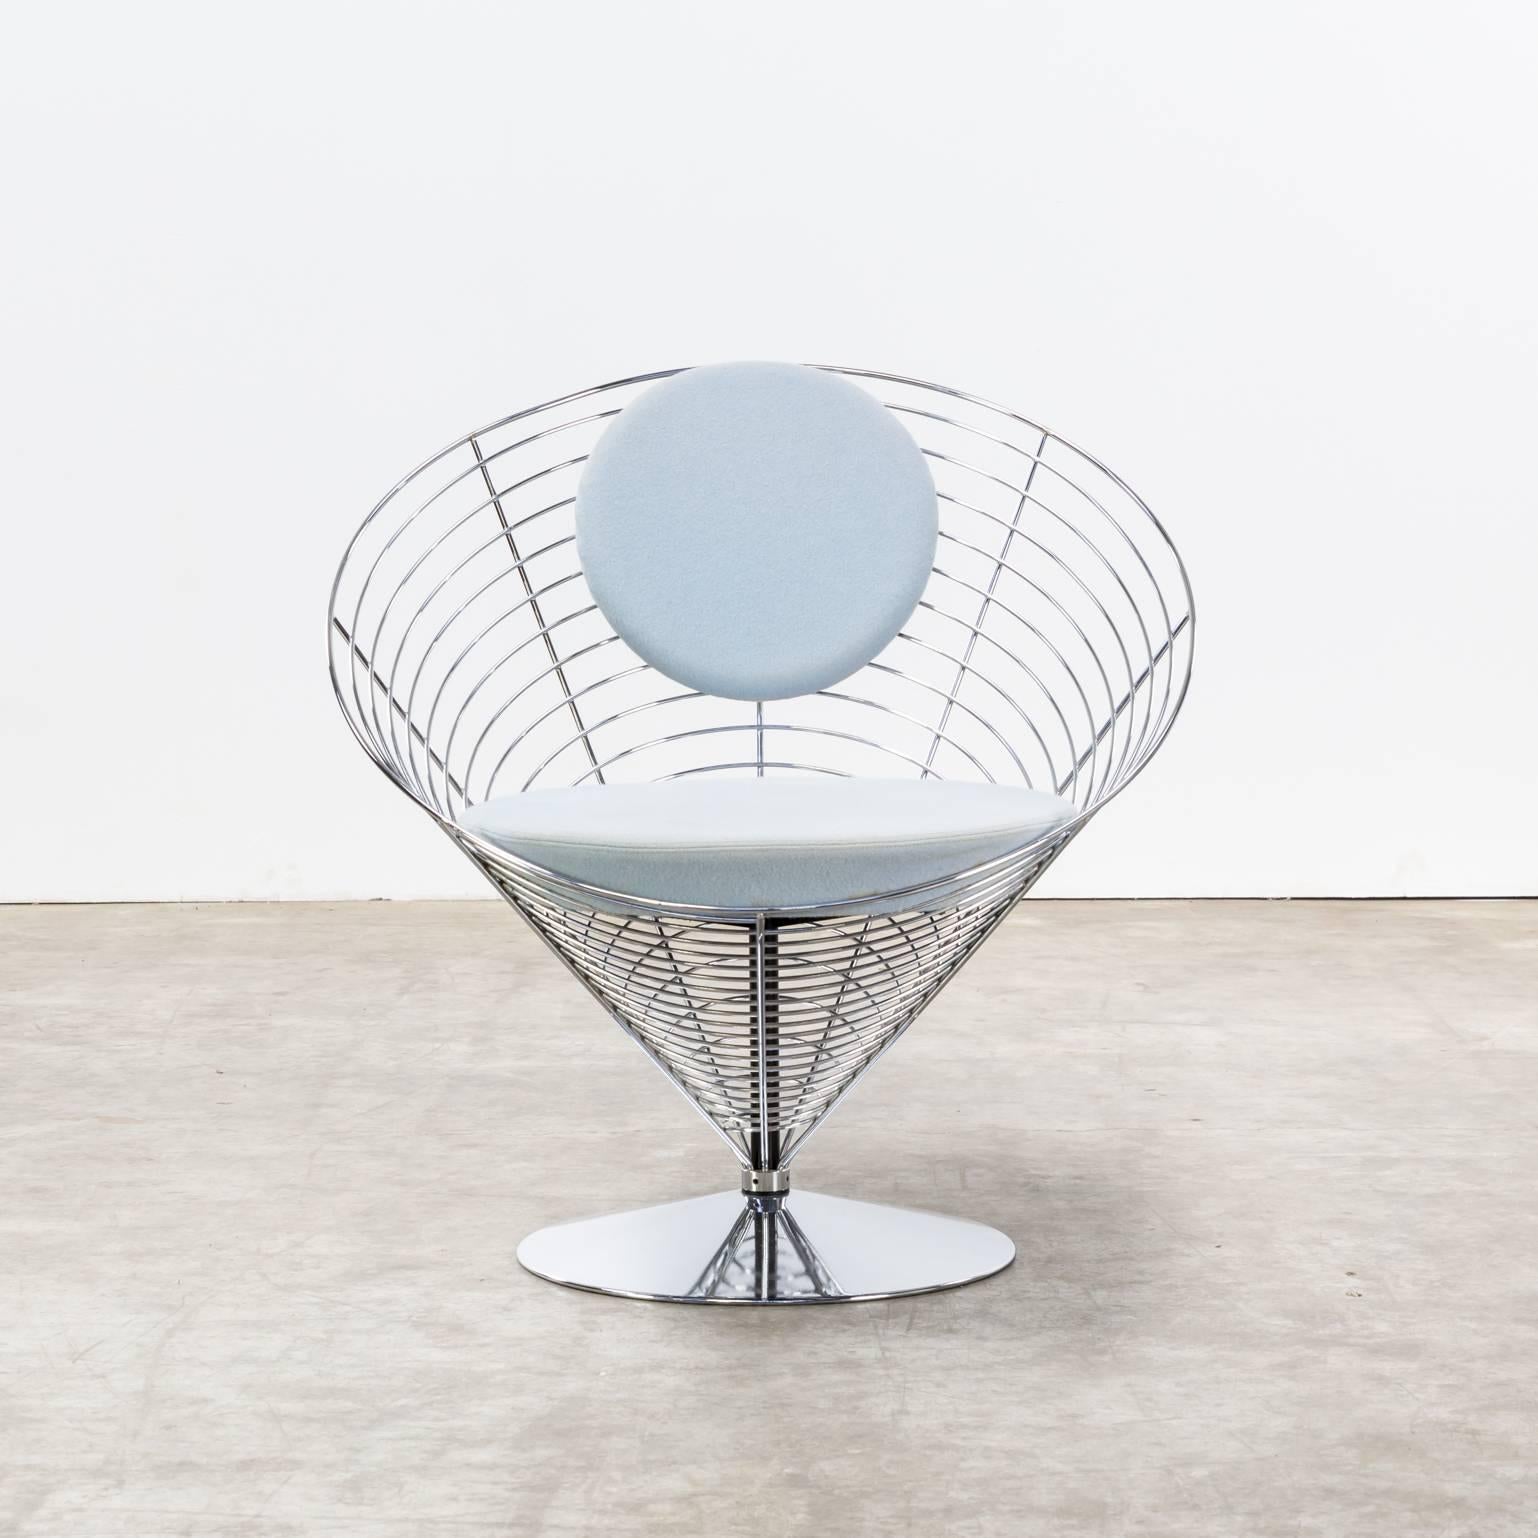 1980s Verner Panton cone chair for Fritz Hansen. Good condition, wear consistent with age and use.